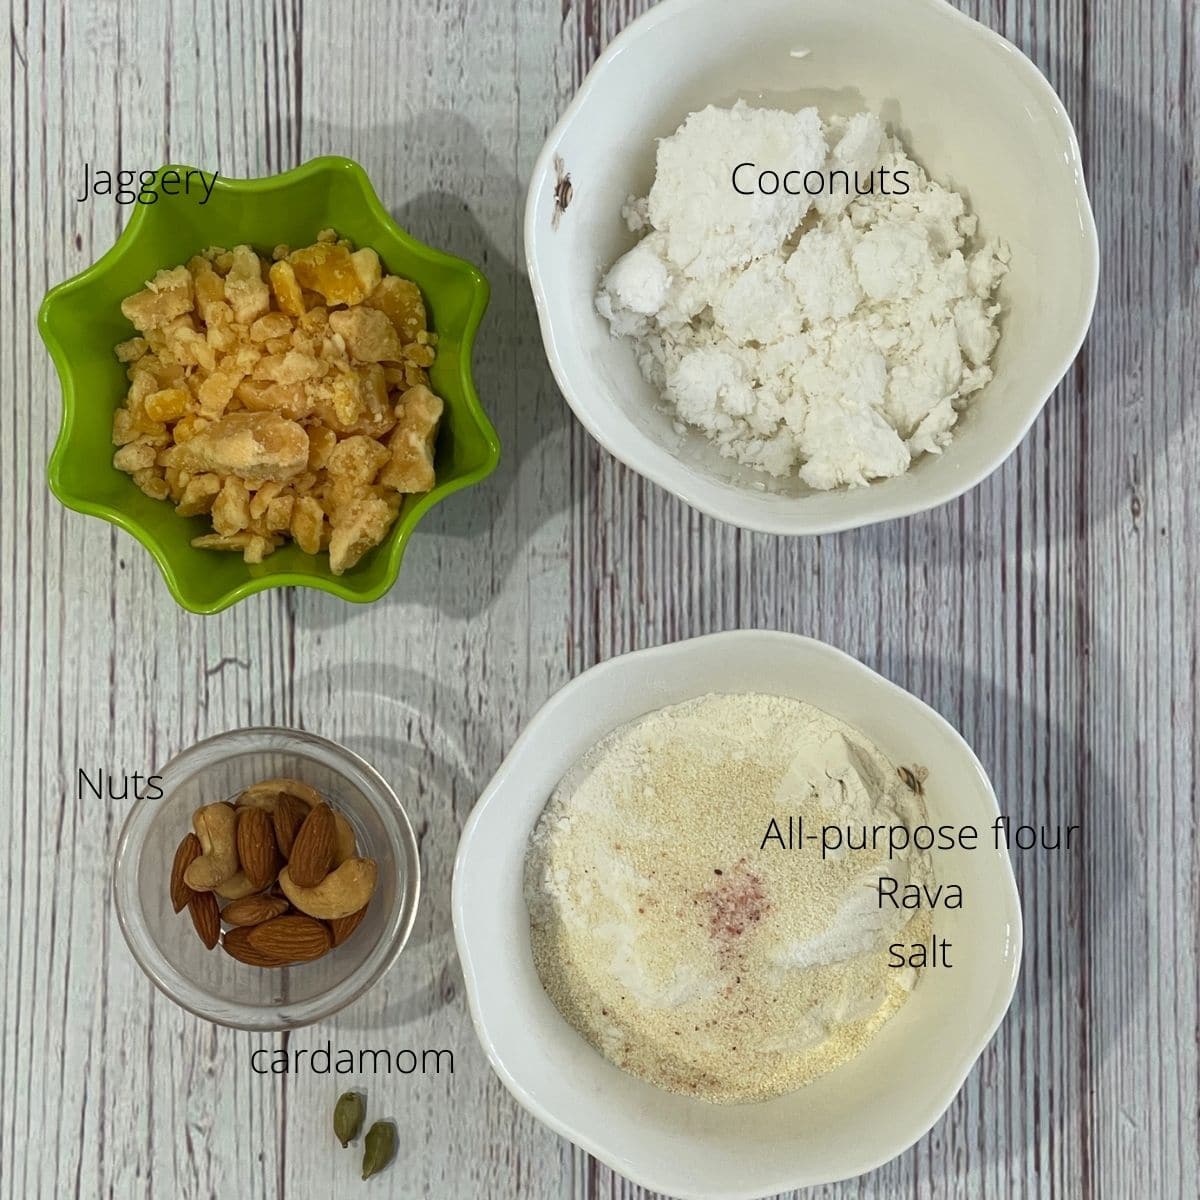 Bowls of karjikai ingredients are on the table like flour, coconut, and jaggery.